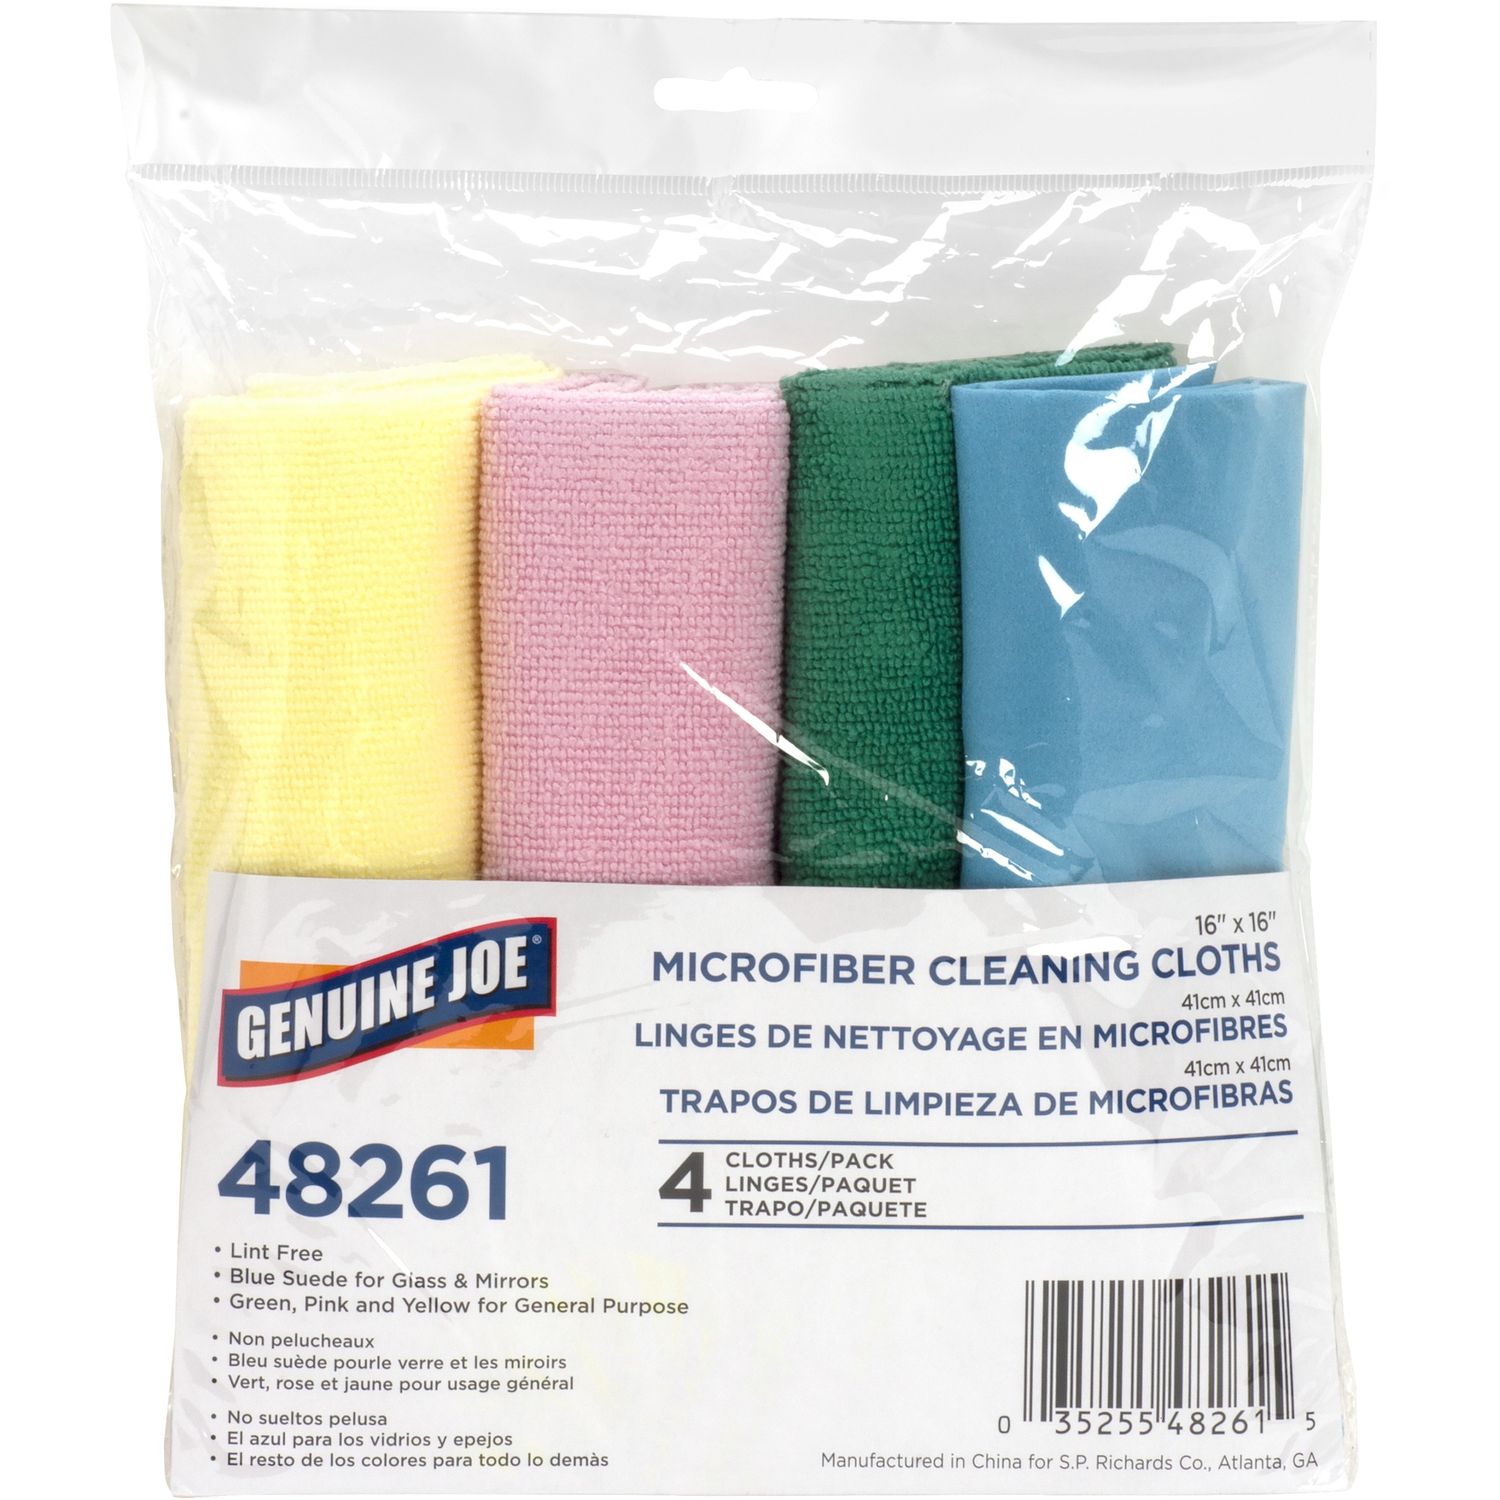 Color-coded Microfiber Cleaning Cloths 16" x 16", Assorted, MicroFiber, Lint-free, Chemical-free, For Multipurpose, 4 / Pack